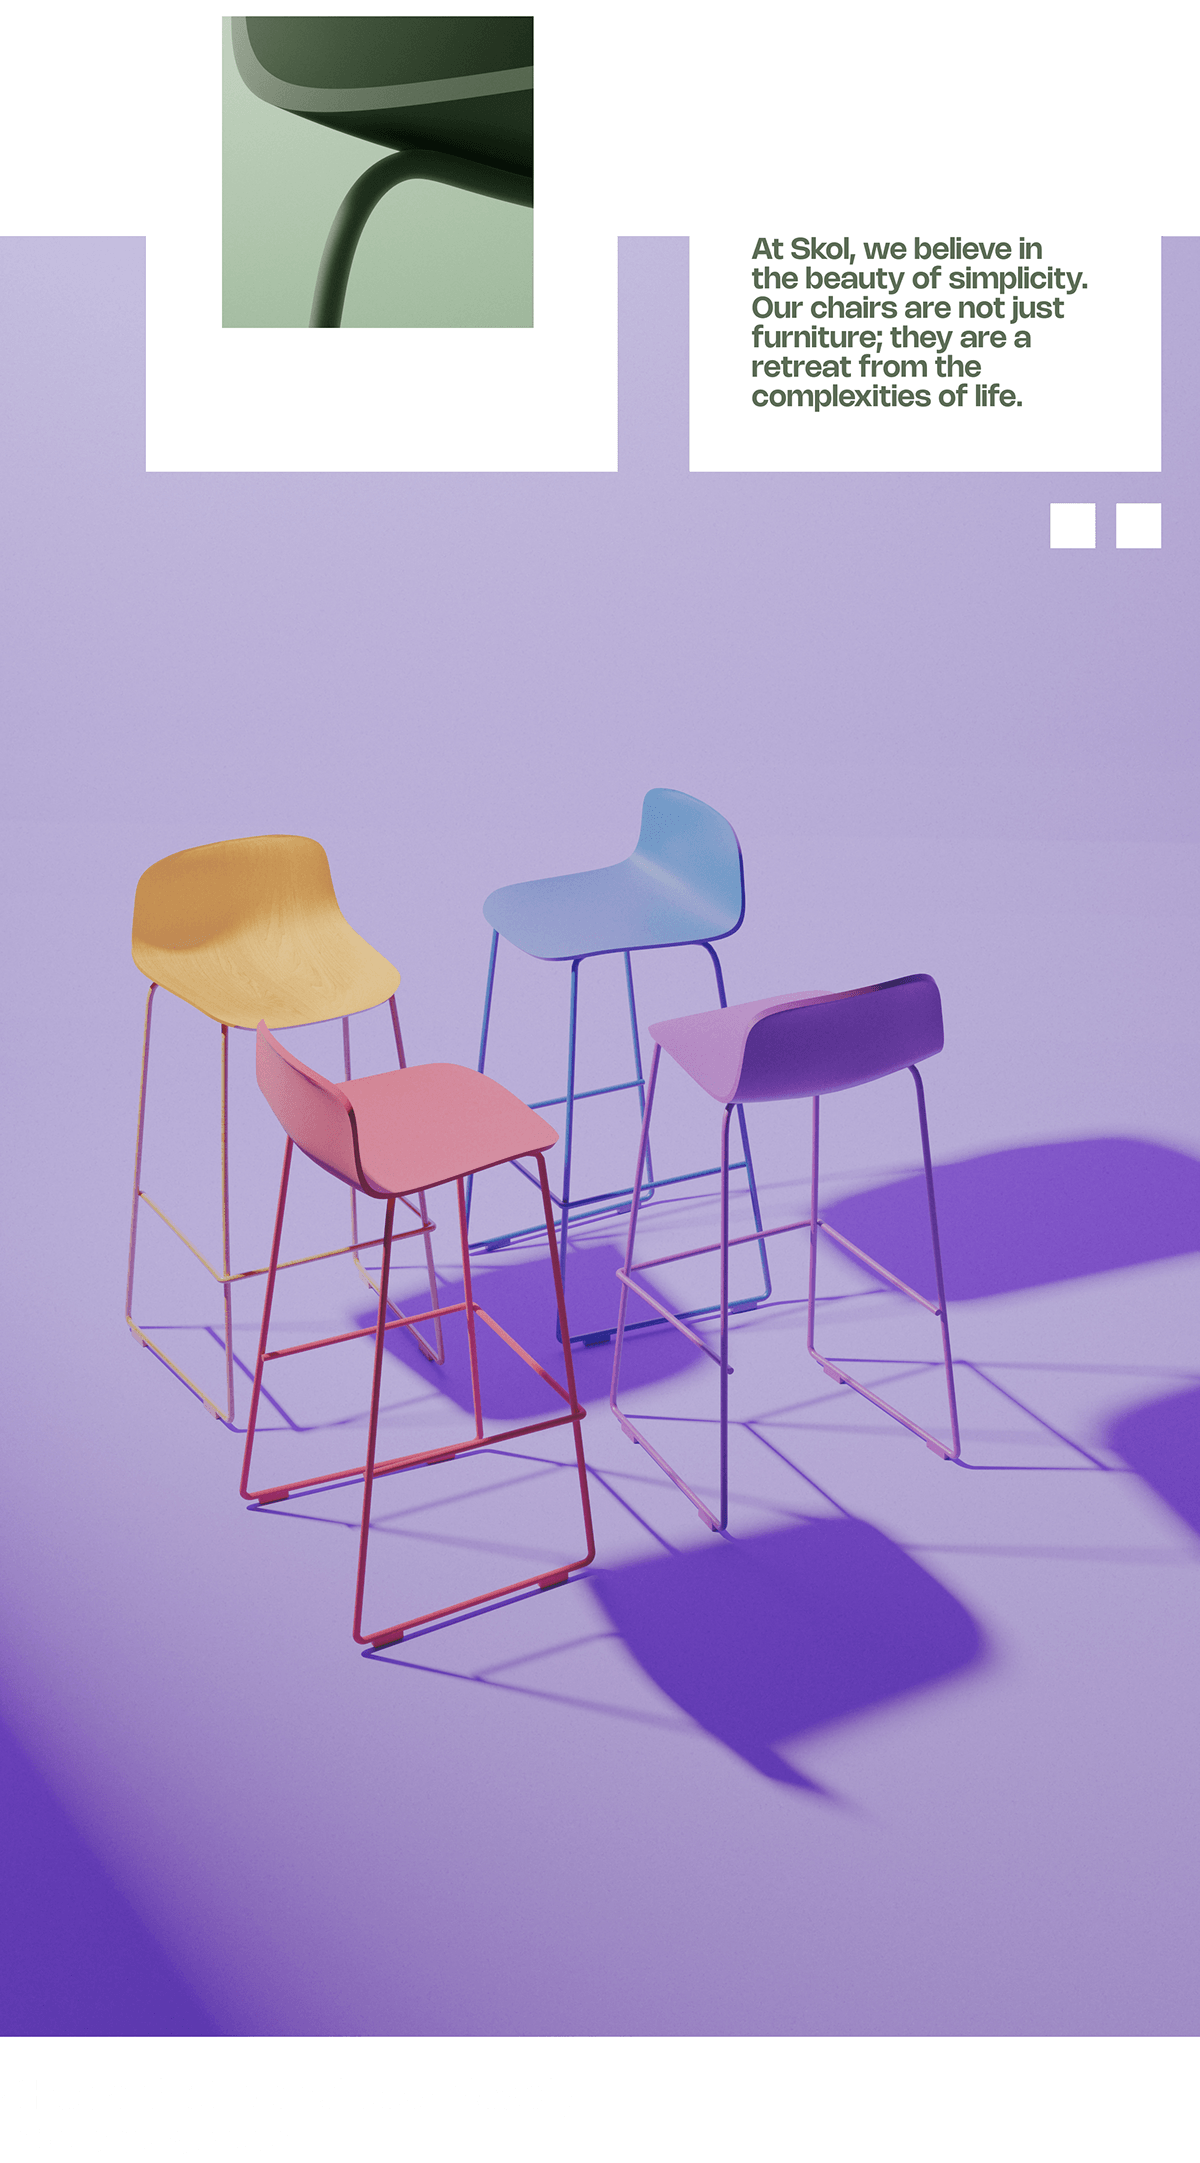 Colorful Skol chairs cast shadows on a purple floor, text overlay about simplicity